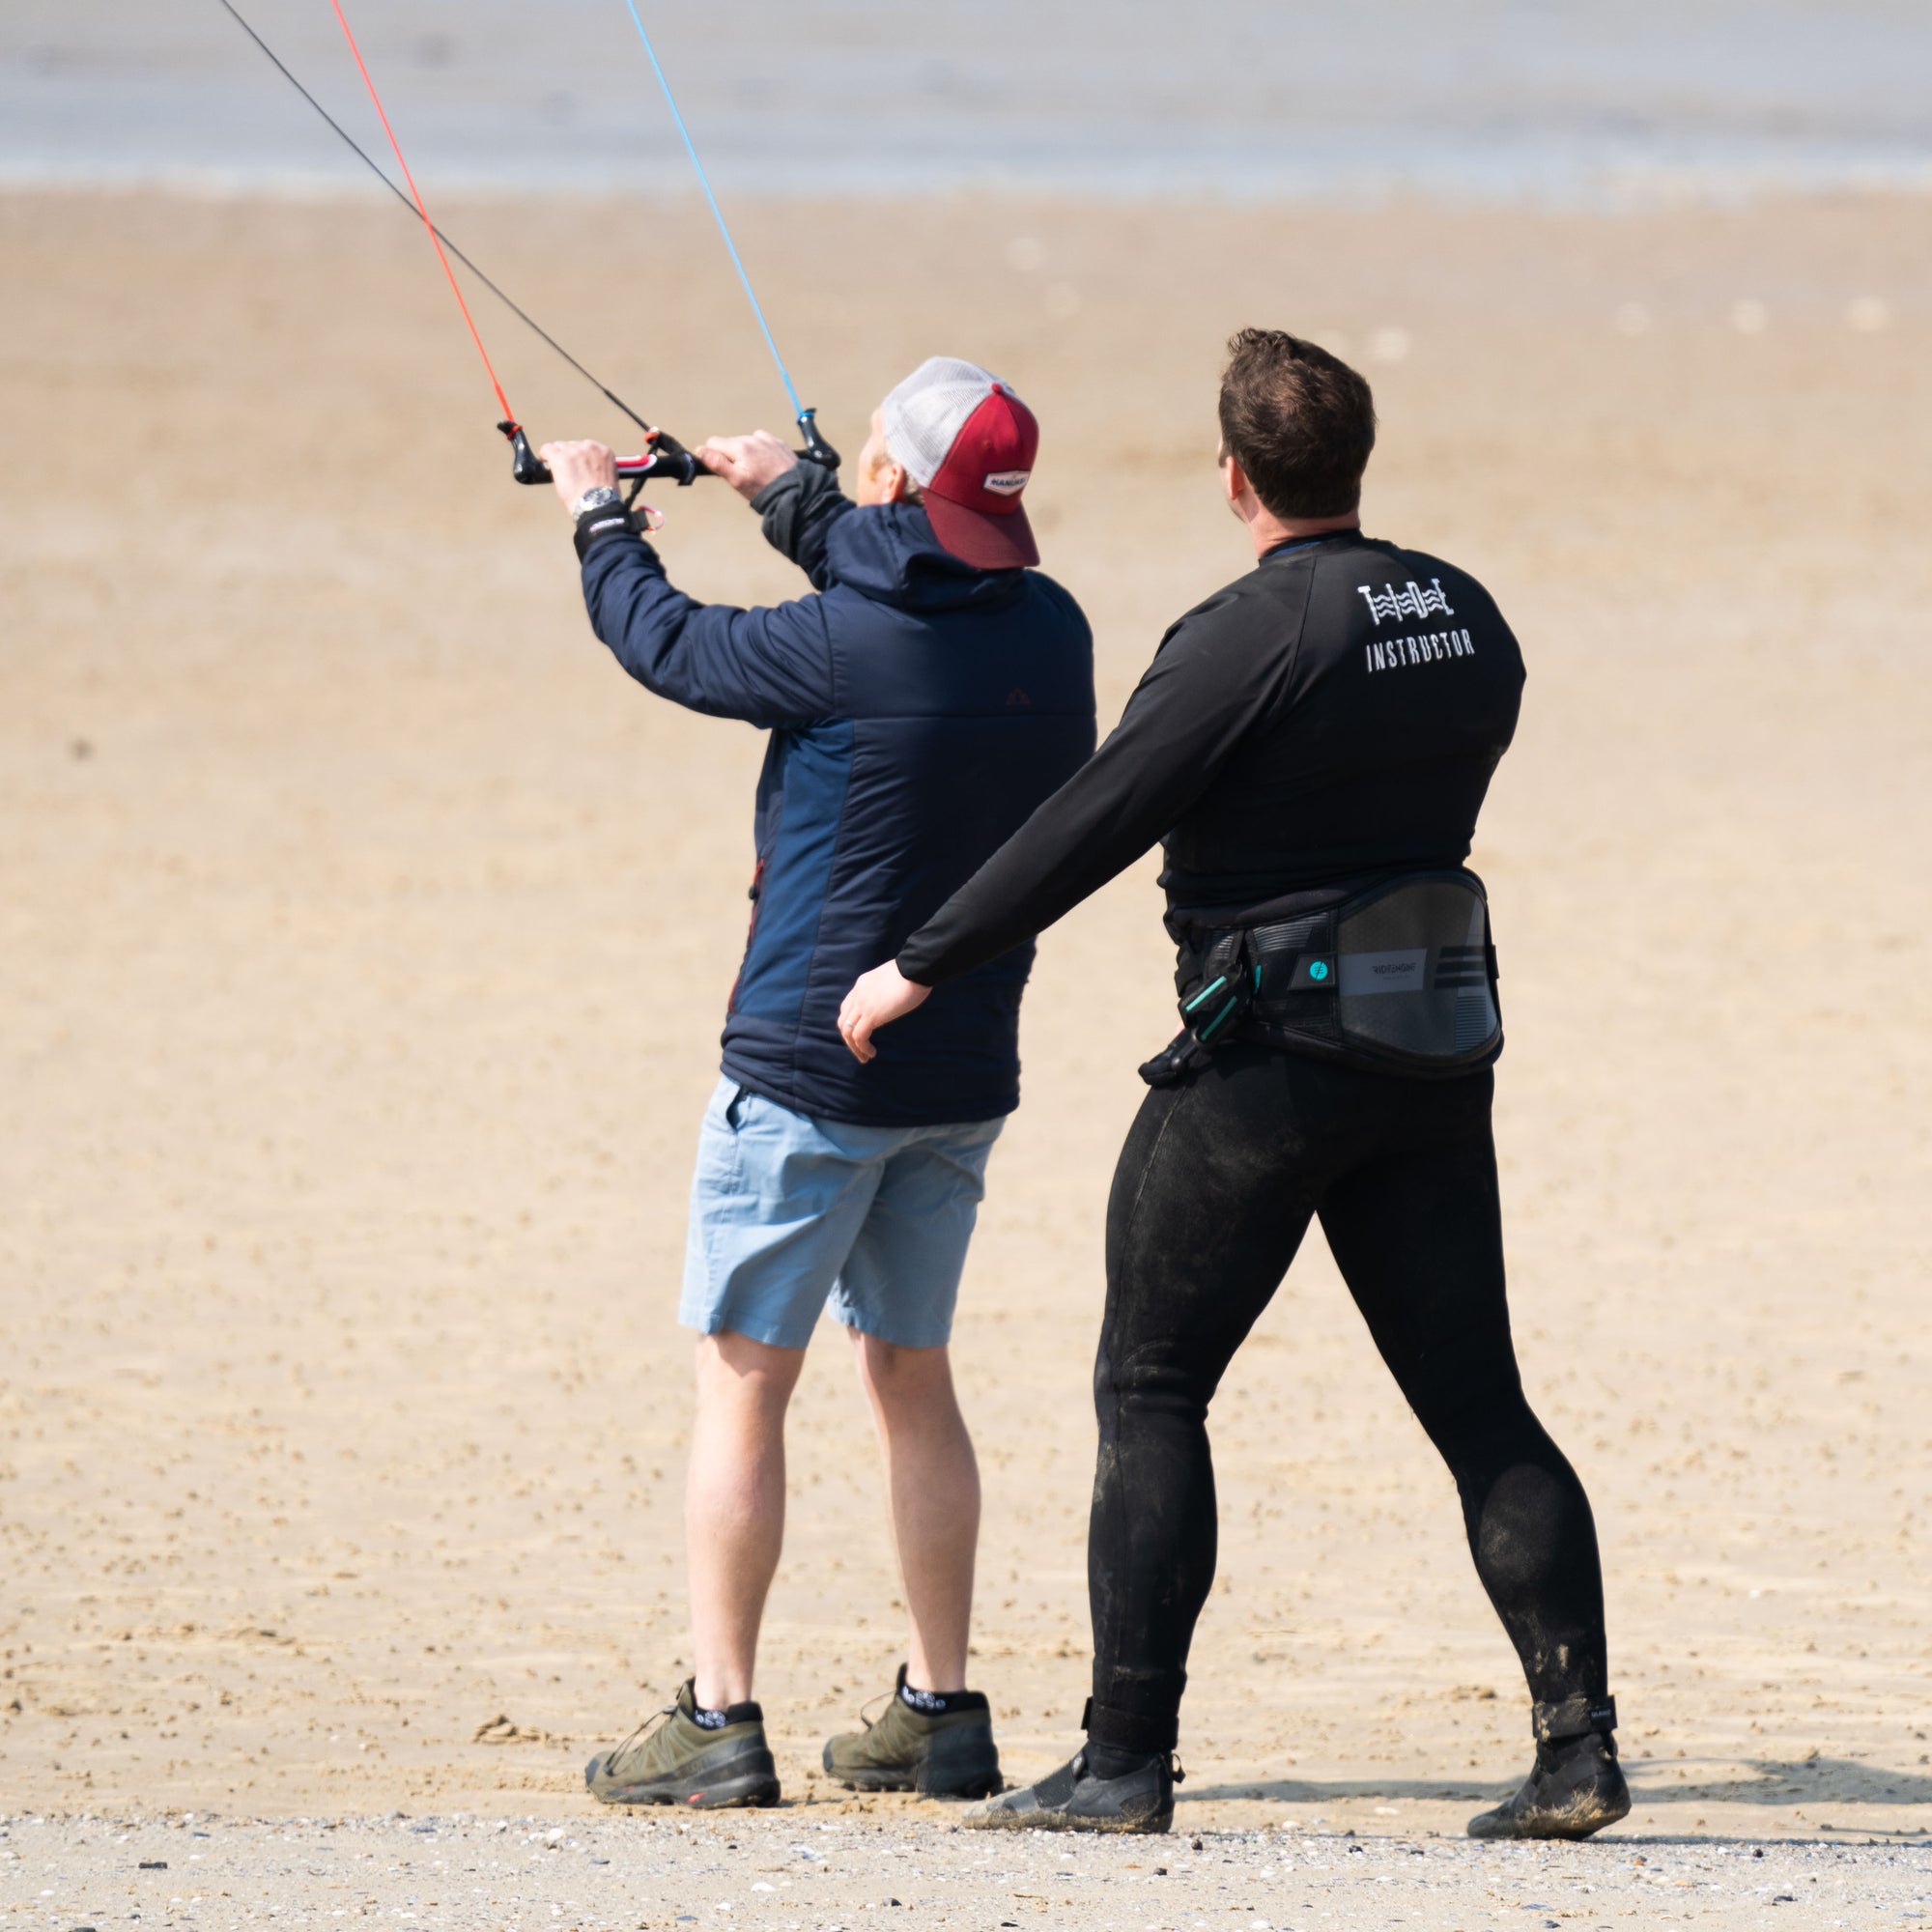 Kitesurfing instructor and student flying an Ozone Ignition trainer kite on the gold sand beach of Minnis Bay near Margate, Kent whilst on a Kitesurfing taster lesson.